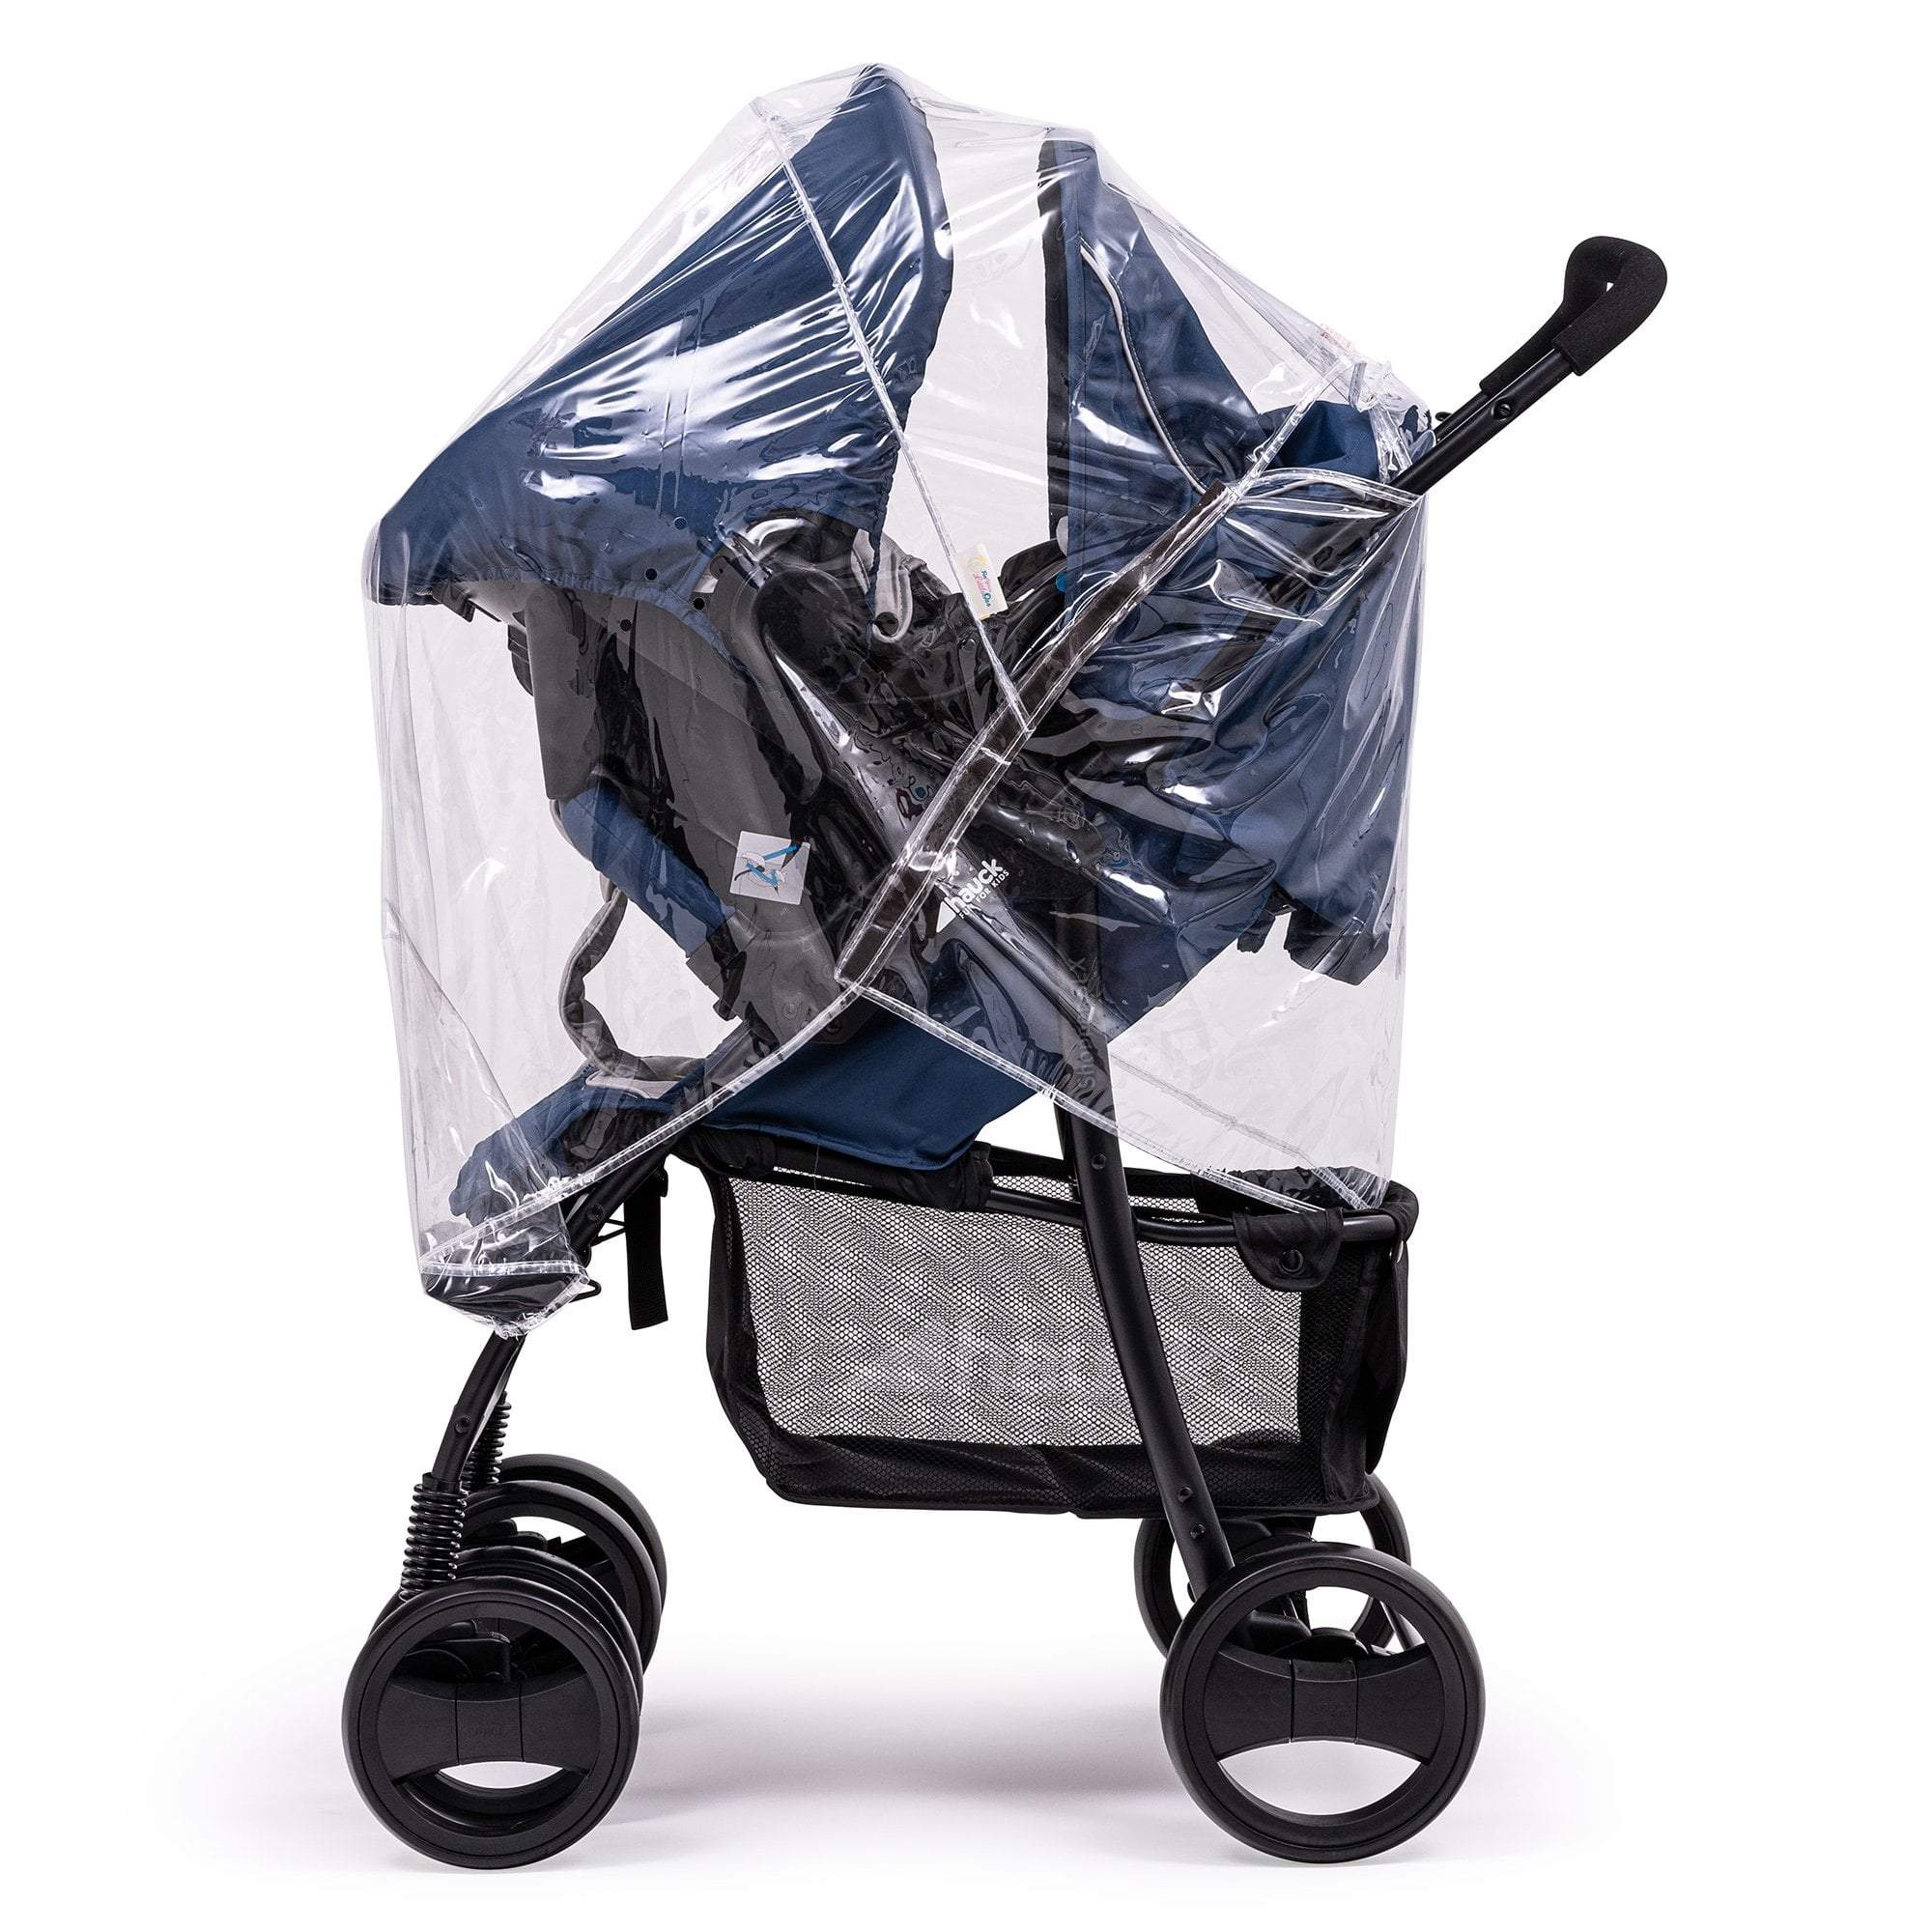 Travel System Raincover Compatible with Combi - Fits All Models - For Your Little One